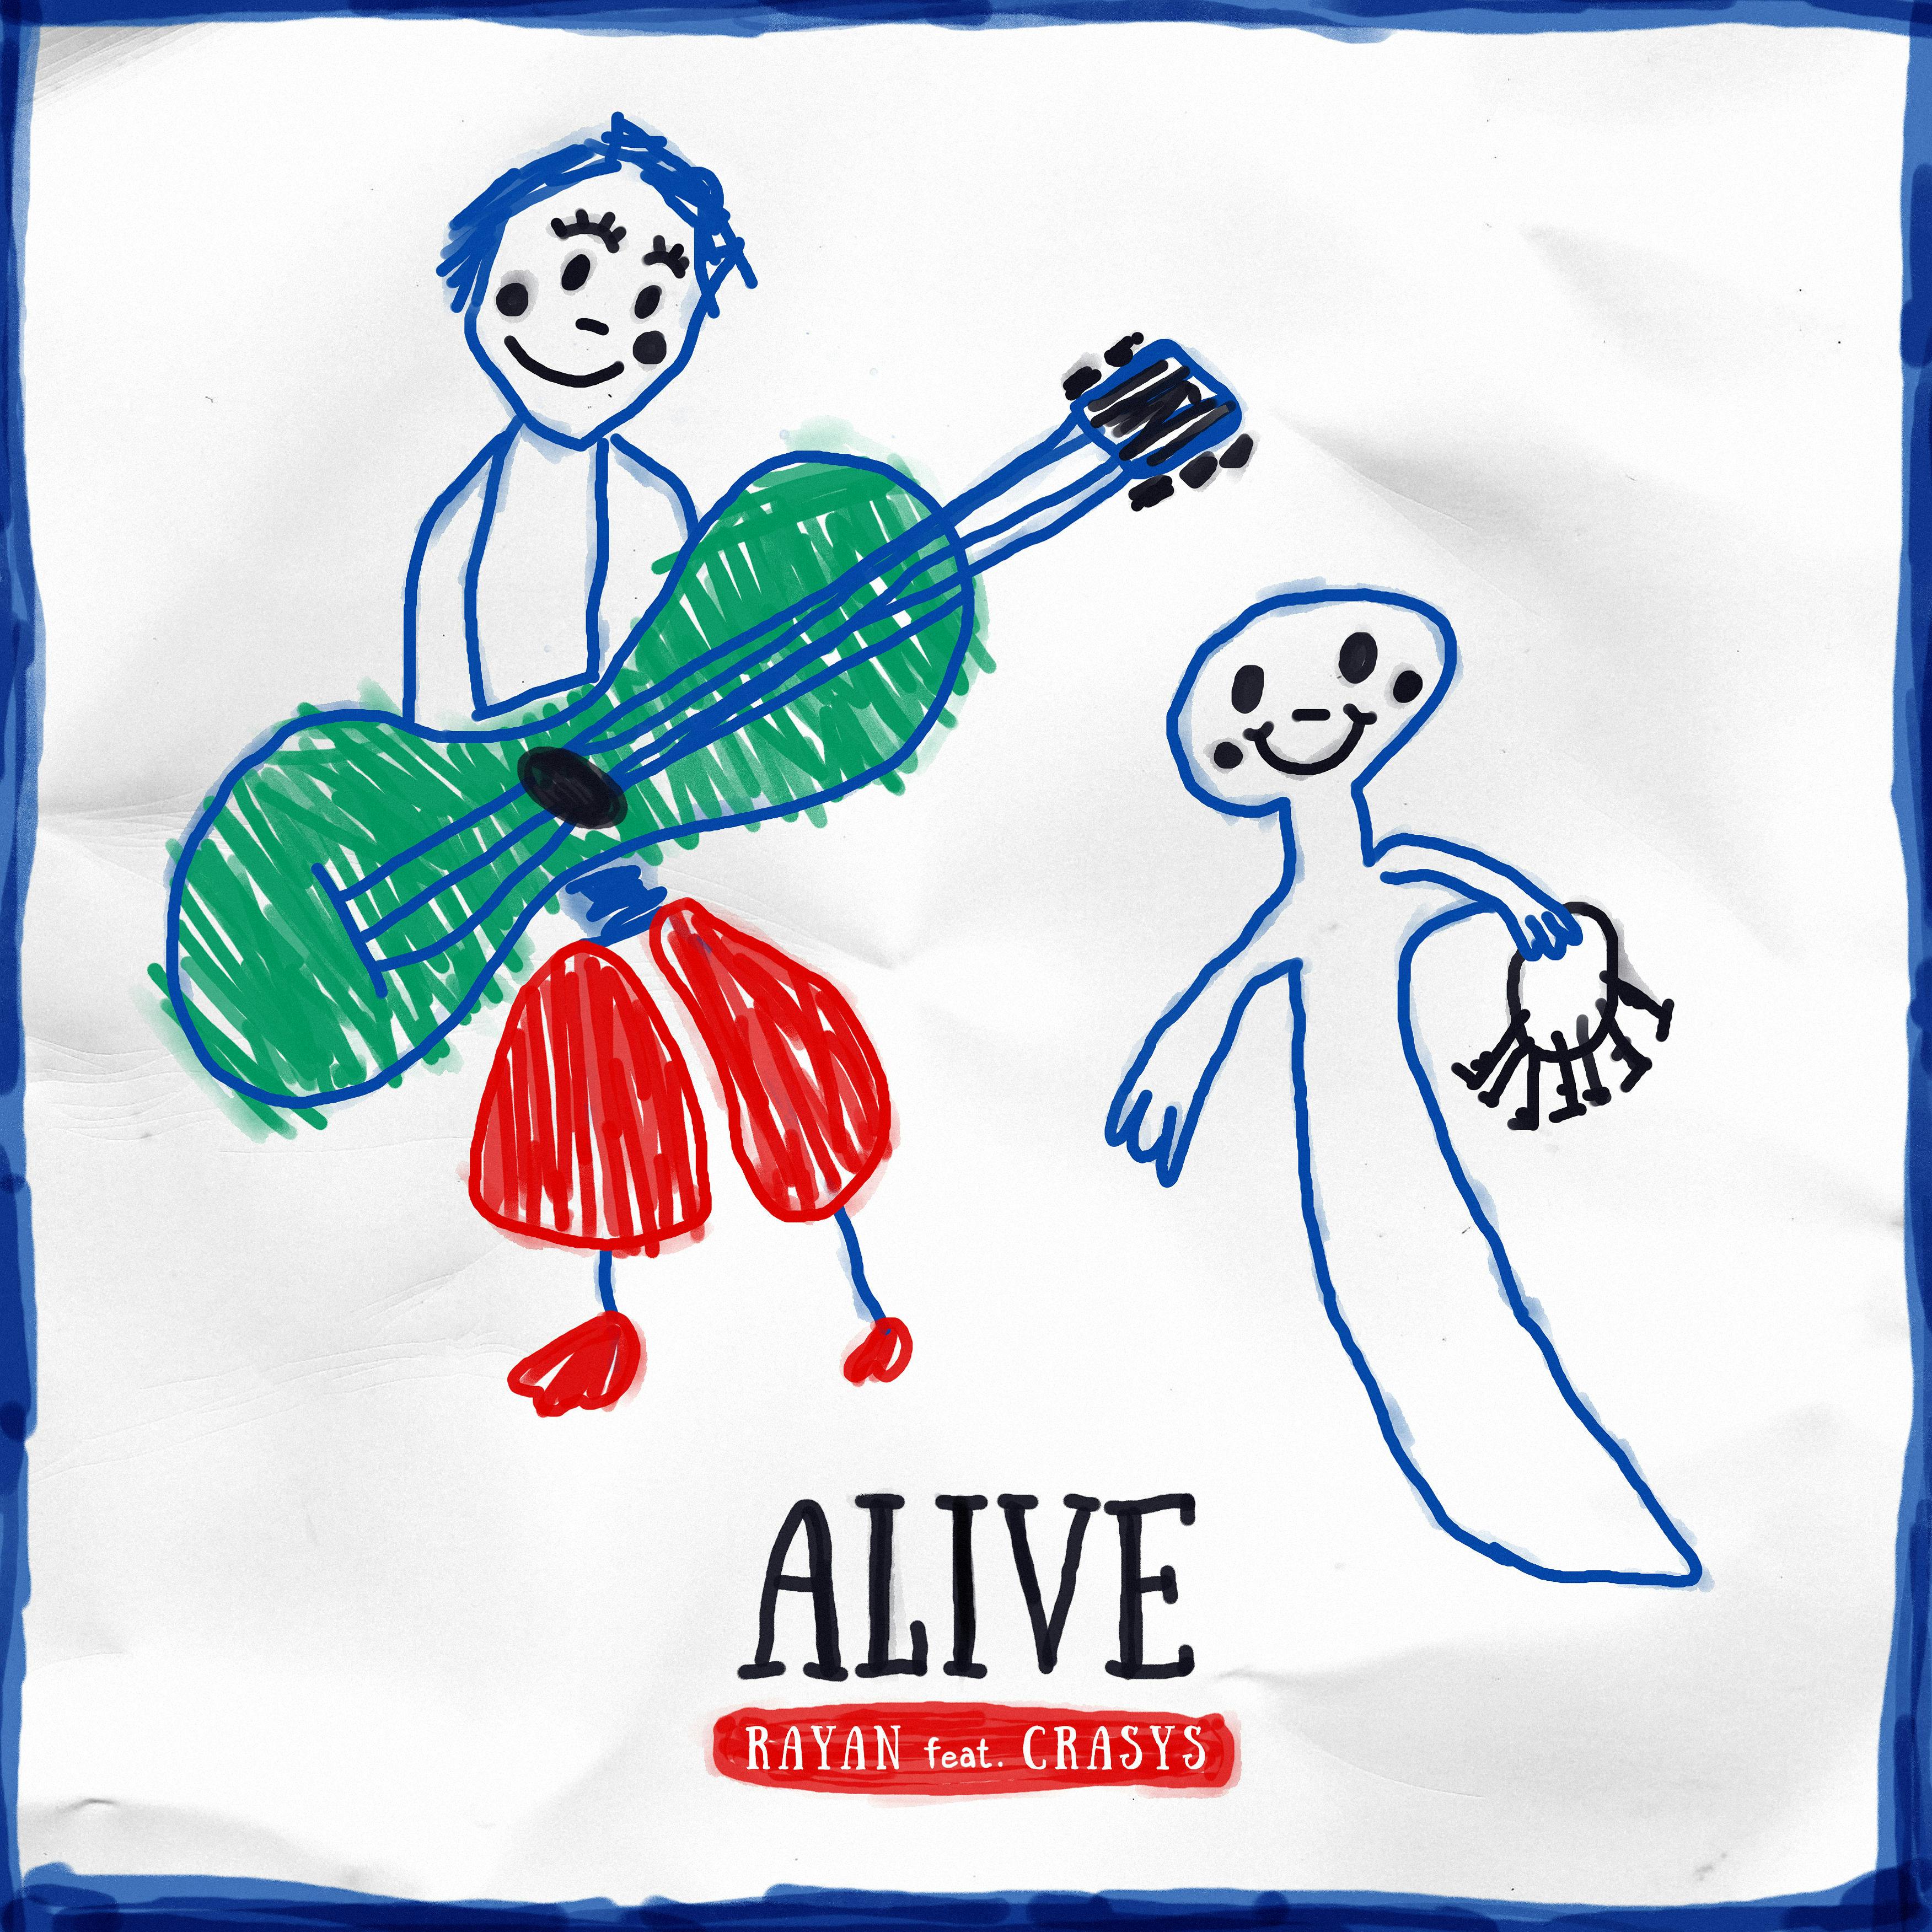 Cover for ALIVE (Alt. Version) by RAYAN